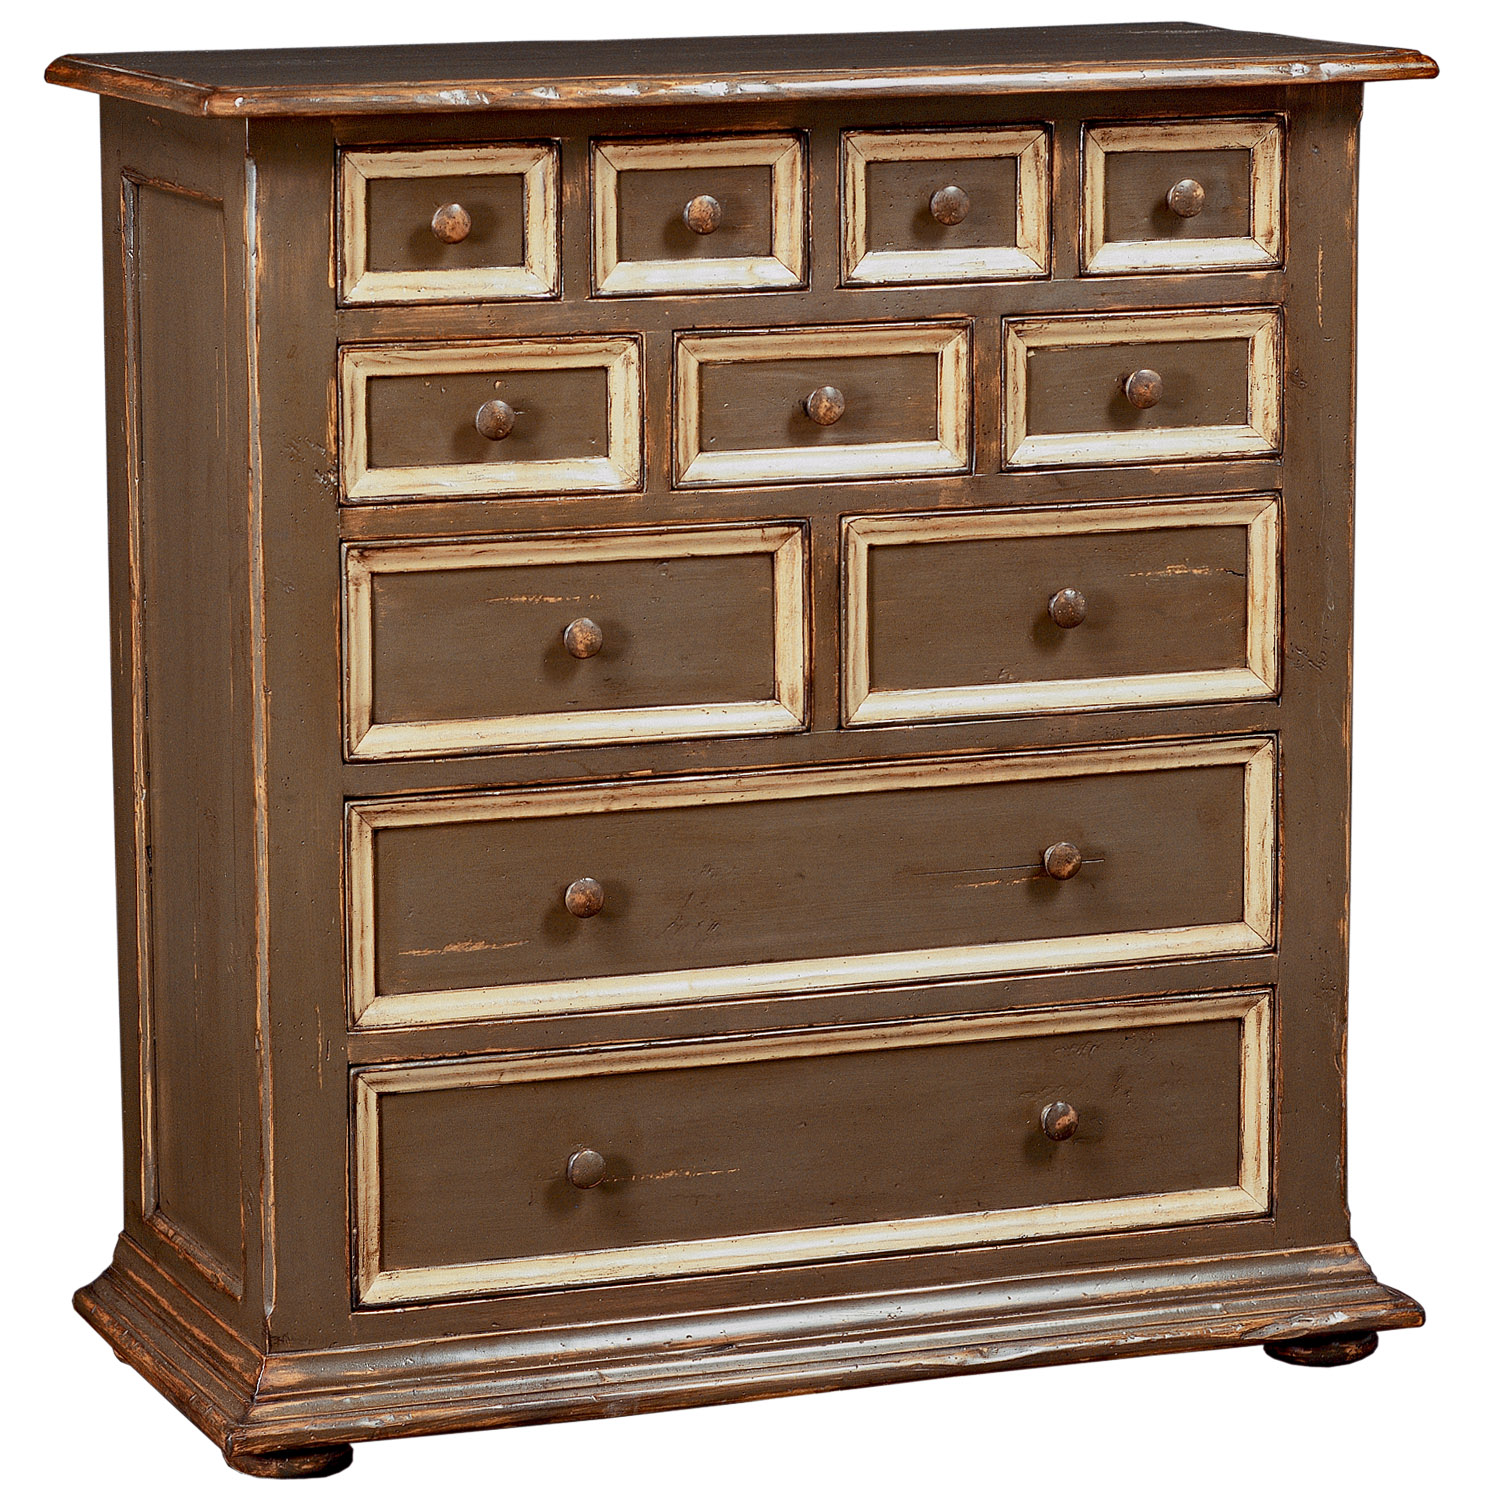 Crantston tradtional painted accented chest of drawers dresser by Woodland Furniture in Idaho Falls